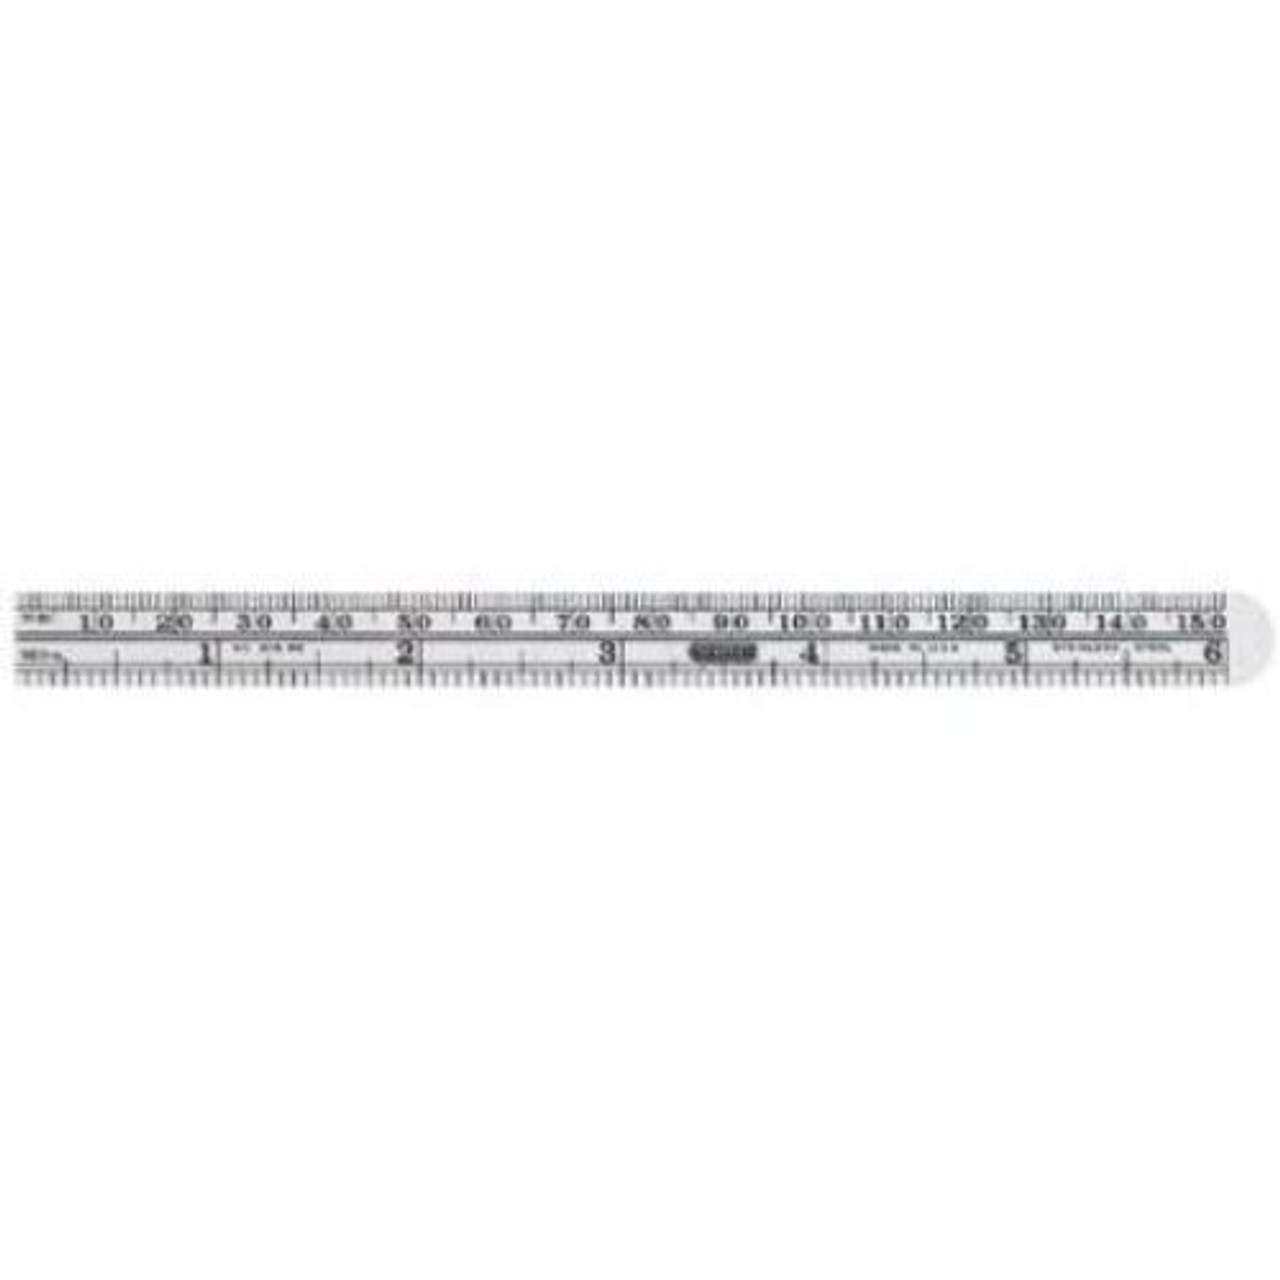 Precision Ruler, Flexible Stainless Steel, 6-In.